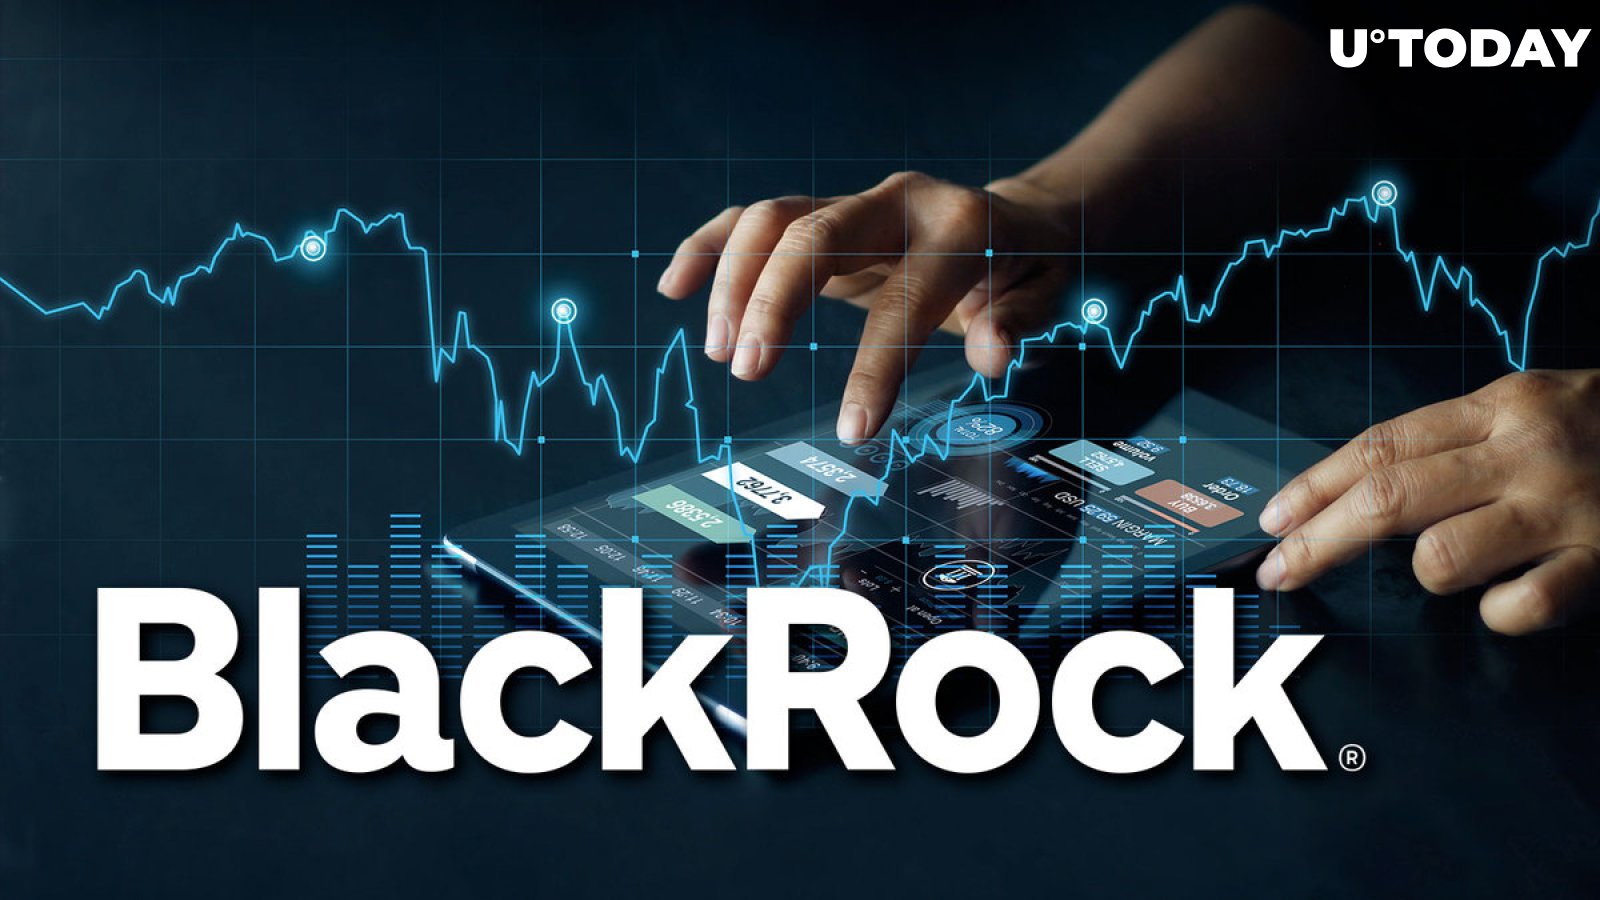 BlackRock's $9.5 Trillion May Flow Into Digital Assets, Bitcoin Expert Willy Woo Believes